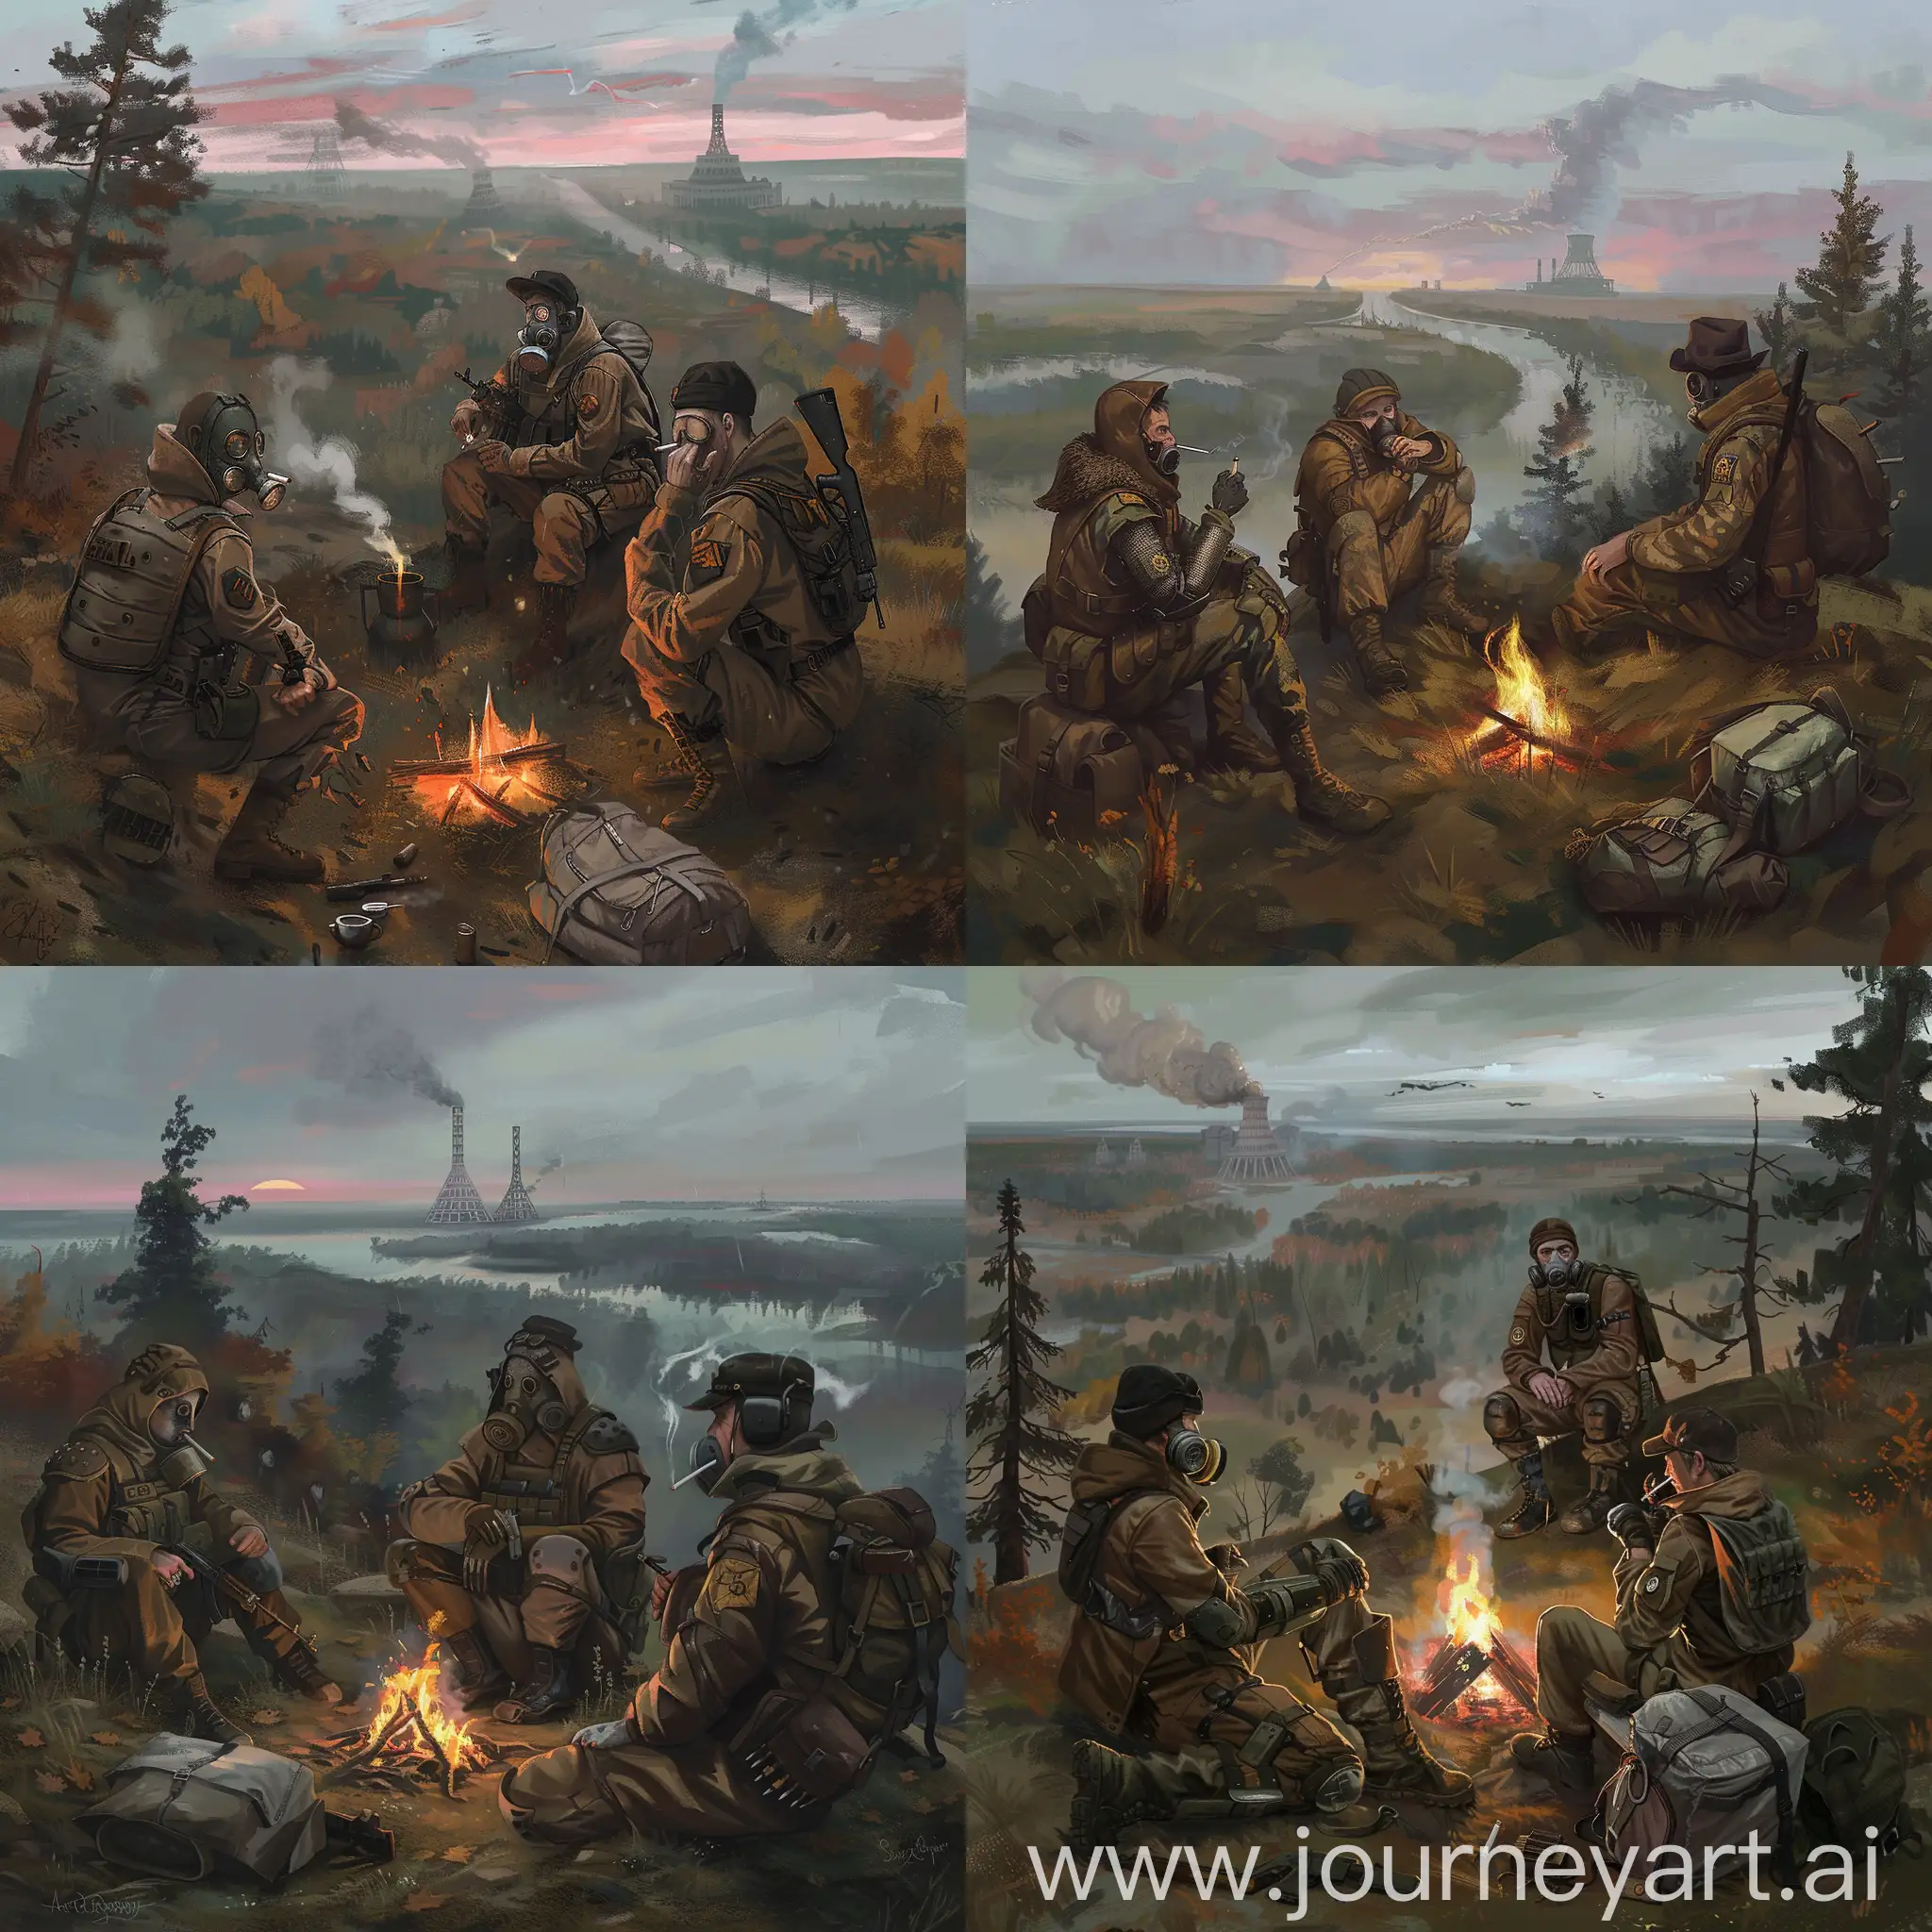 Stalker-Art-Three-Stalkers-by-a-Campfire-in-Chernobyl